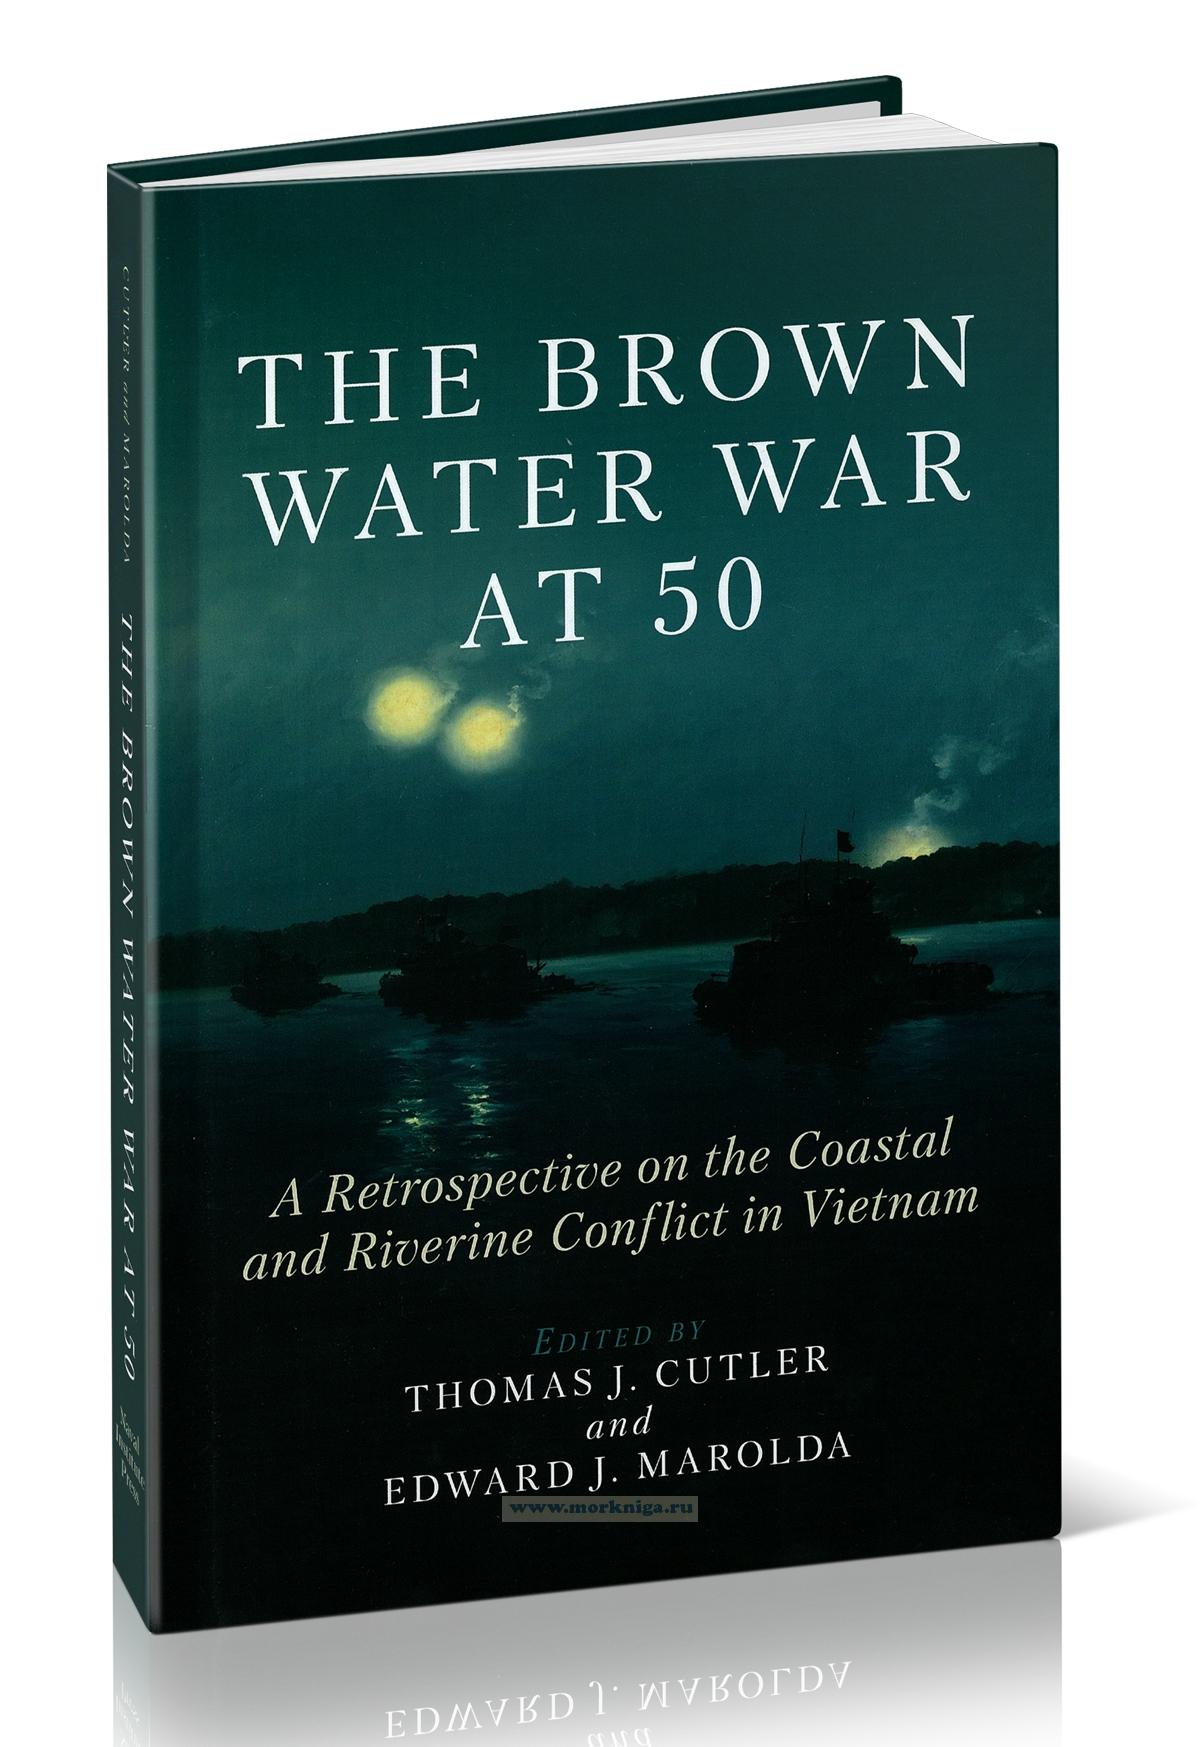 The Brown Water War at 50. A Retrospective on the Coastal and Riverine Conflict in Vietnam